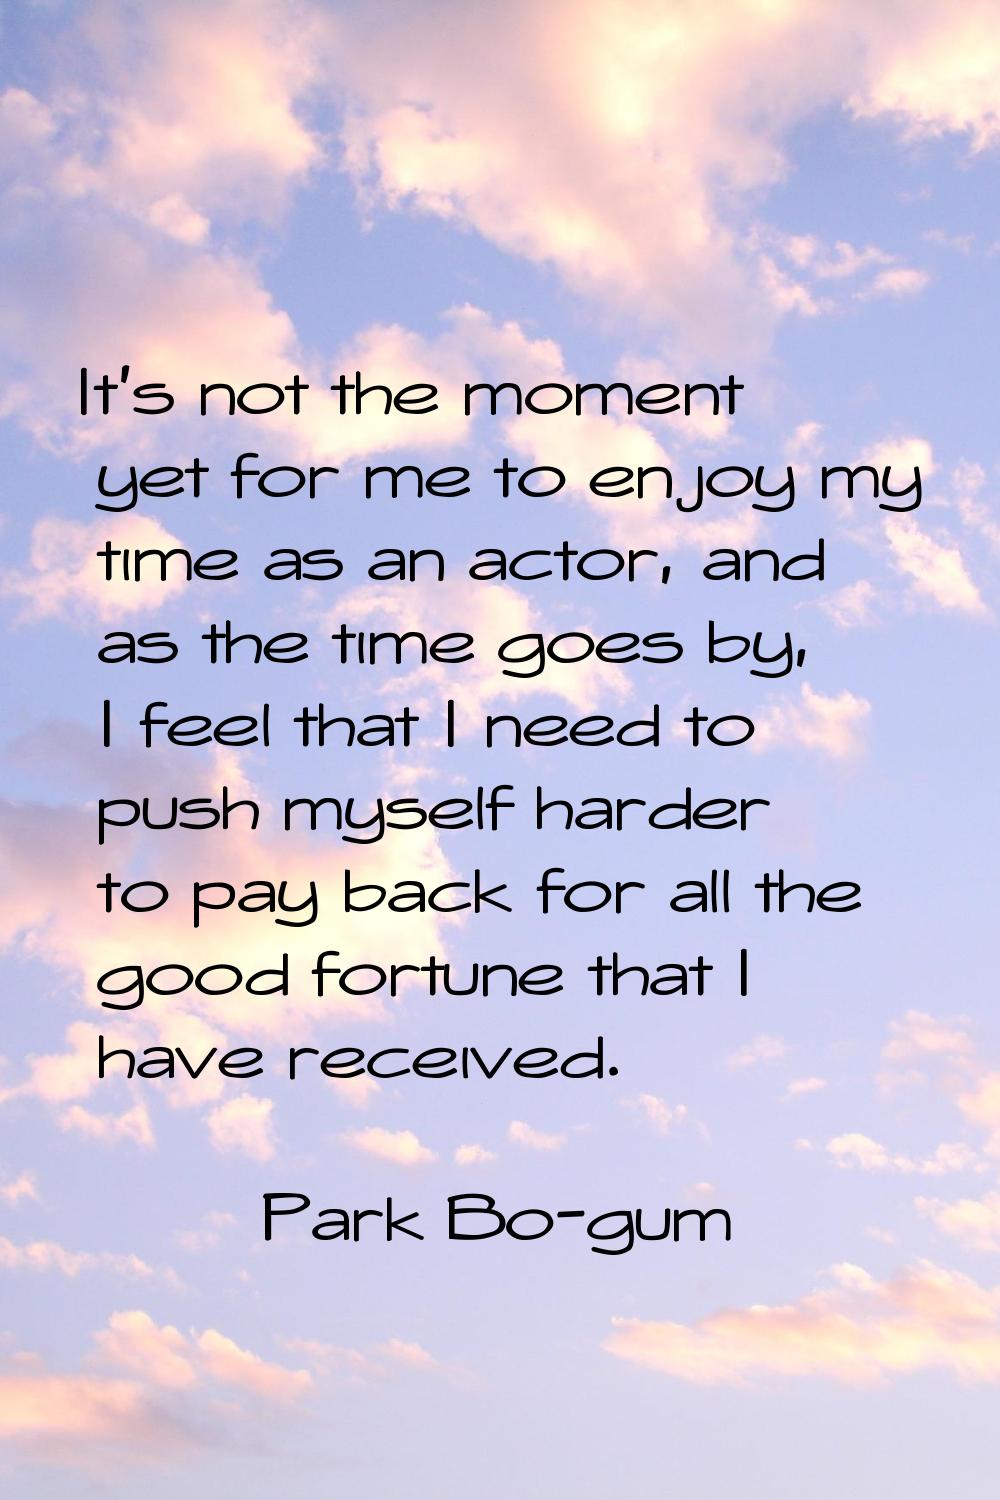 It's not the moment yet for me to enjoy my time as an actor, and as the time goes by, I feel that I